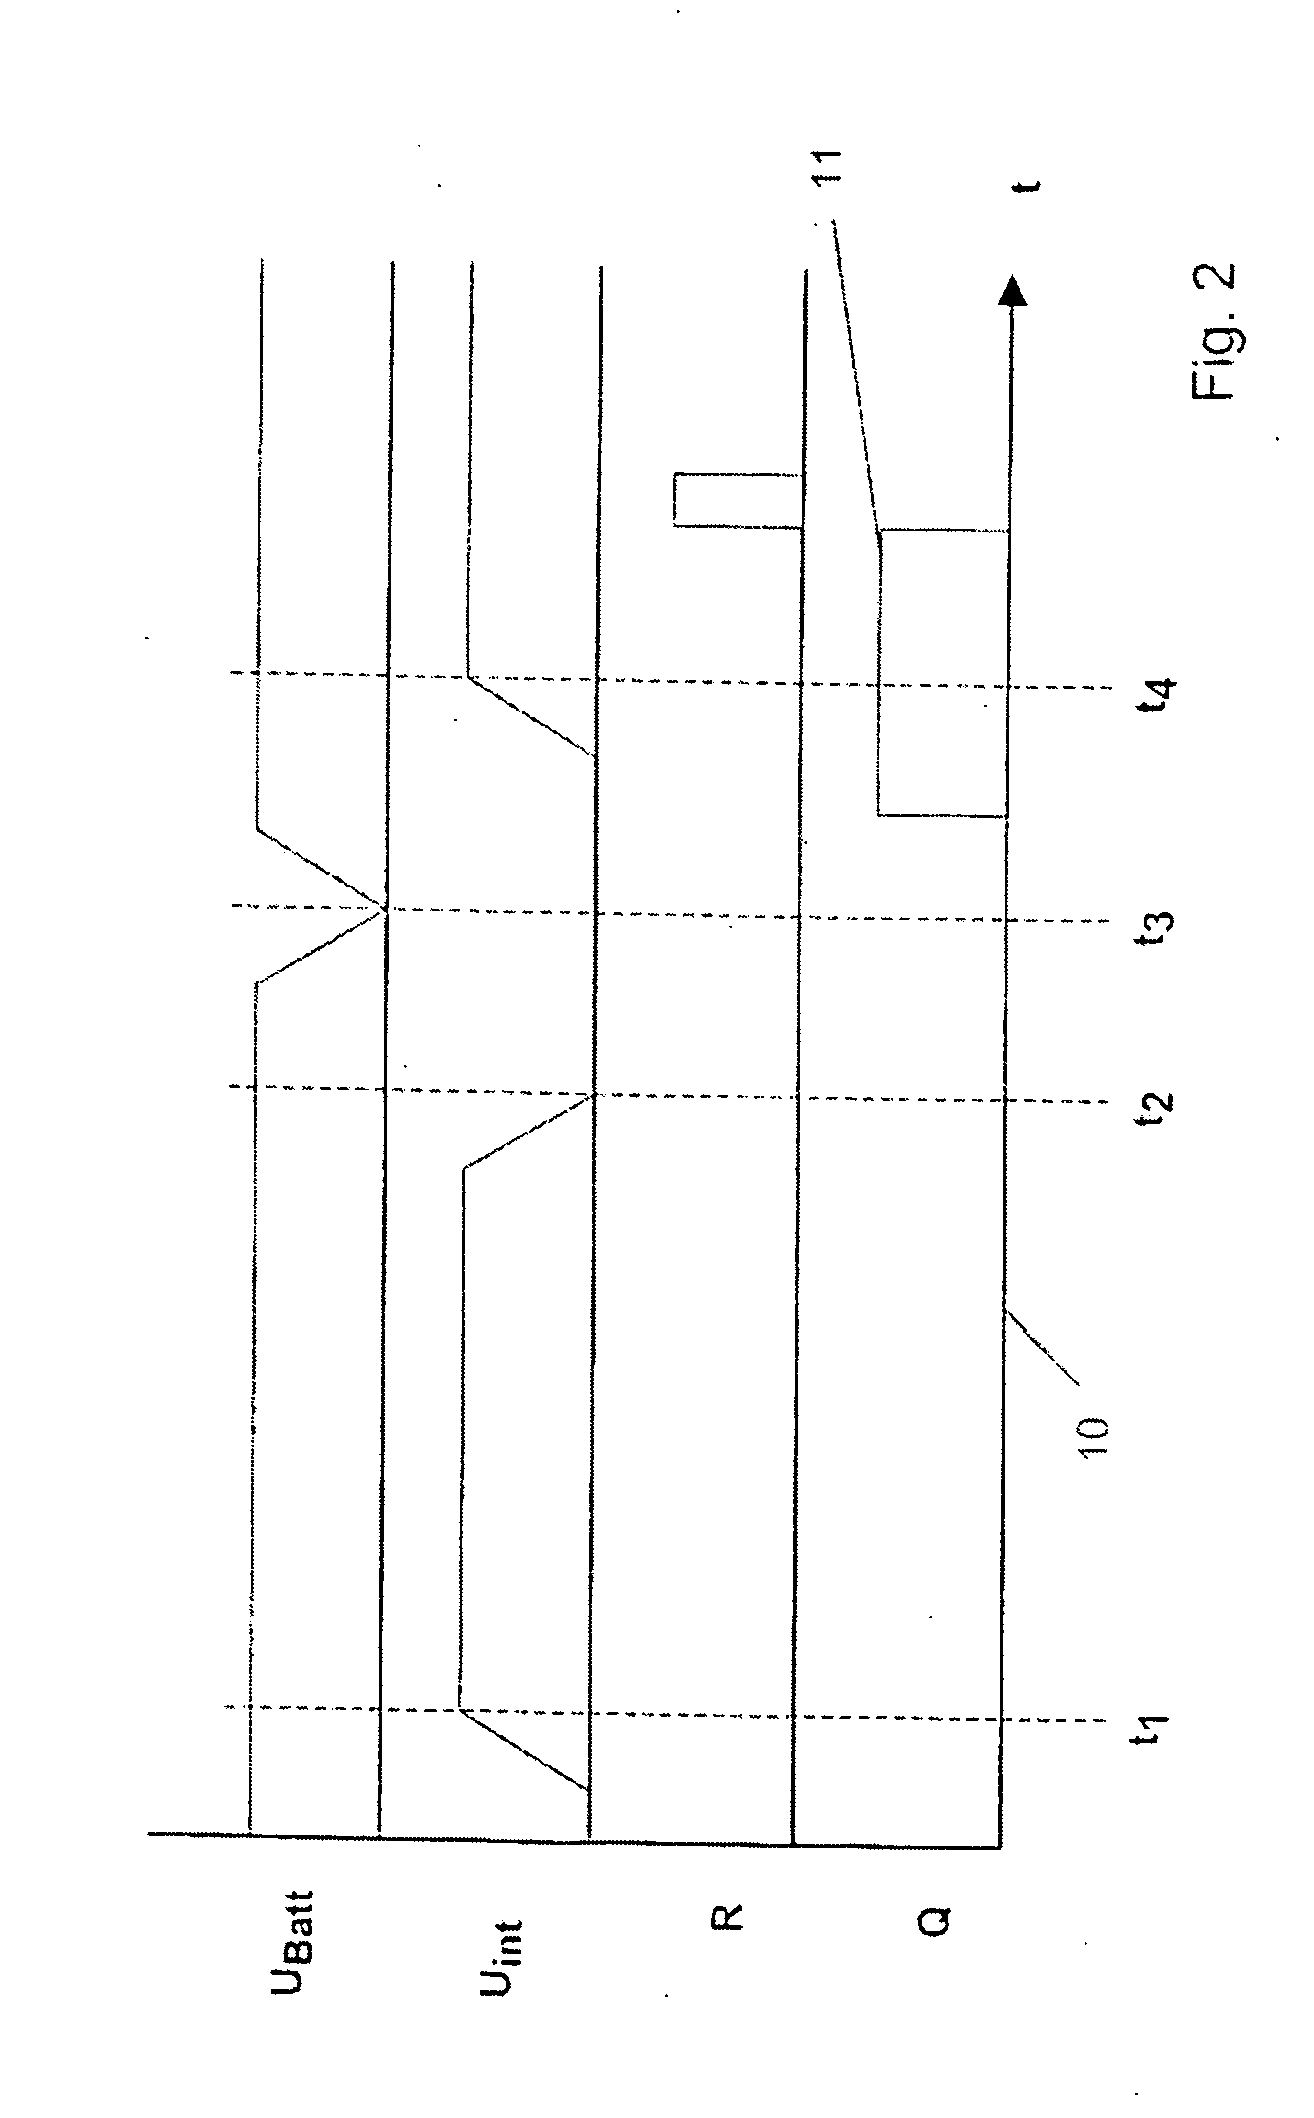 Switching device for detecting a voltage interruption